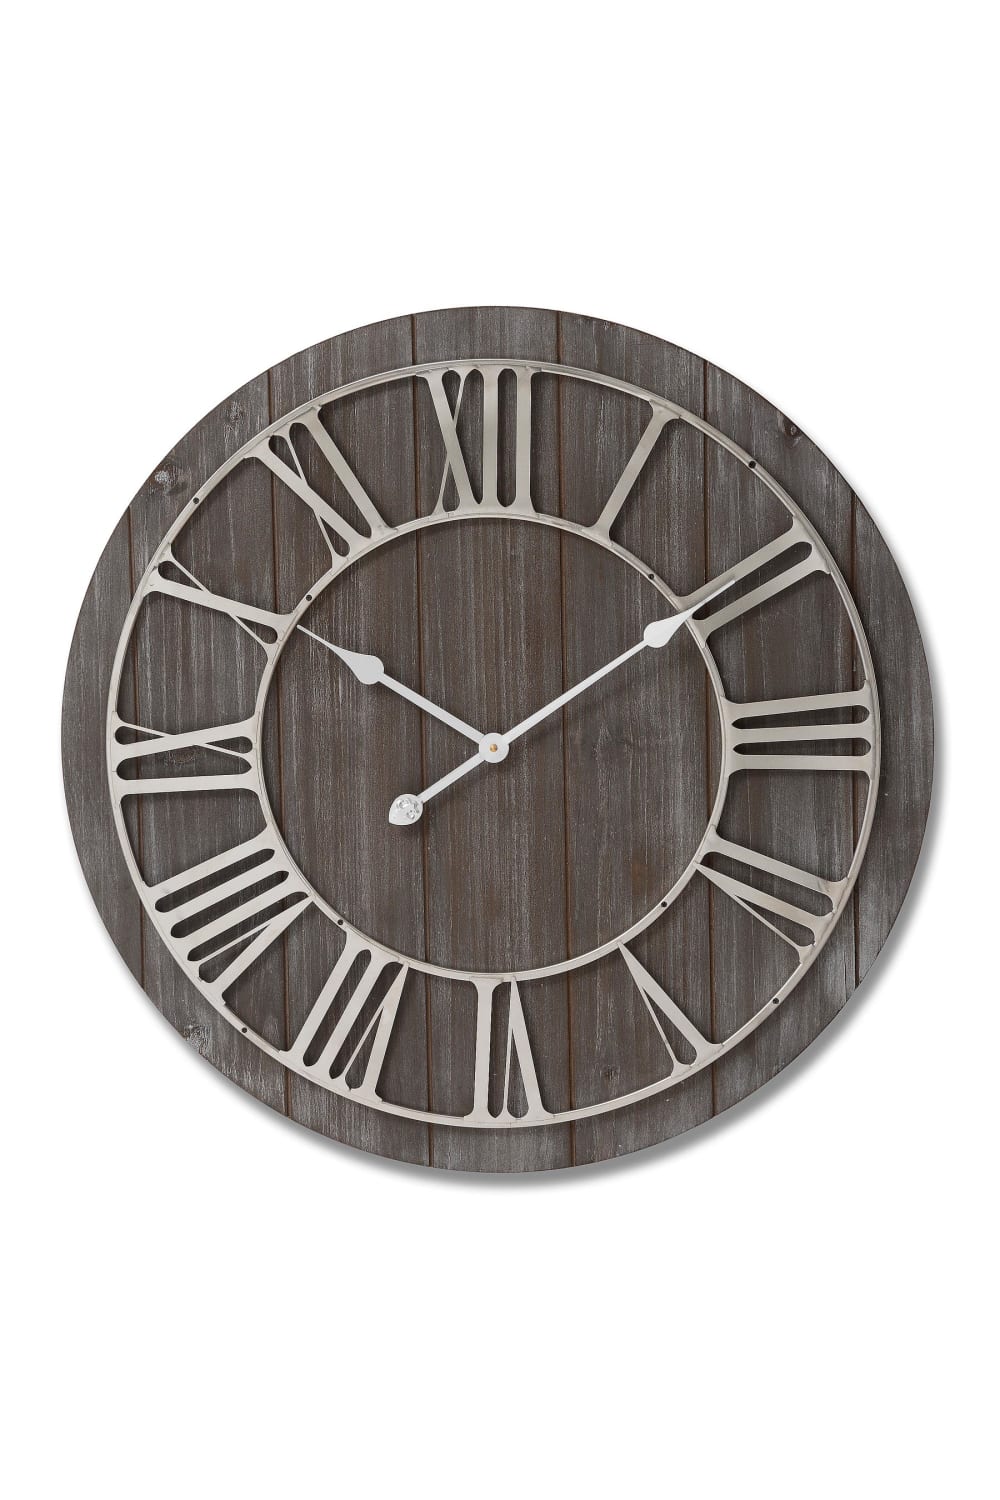 Contrast Wooden Wall Clock - H 26.8